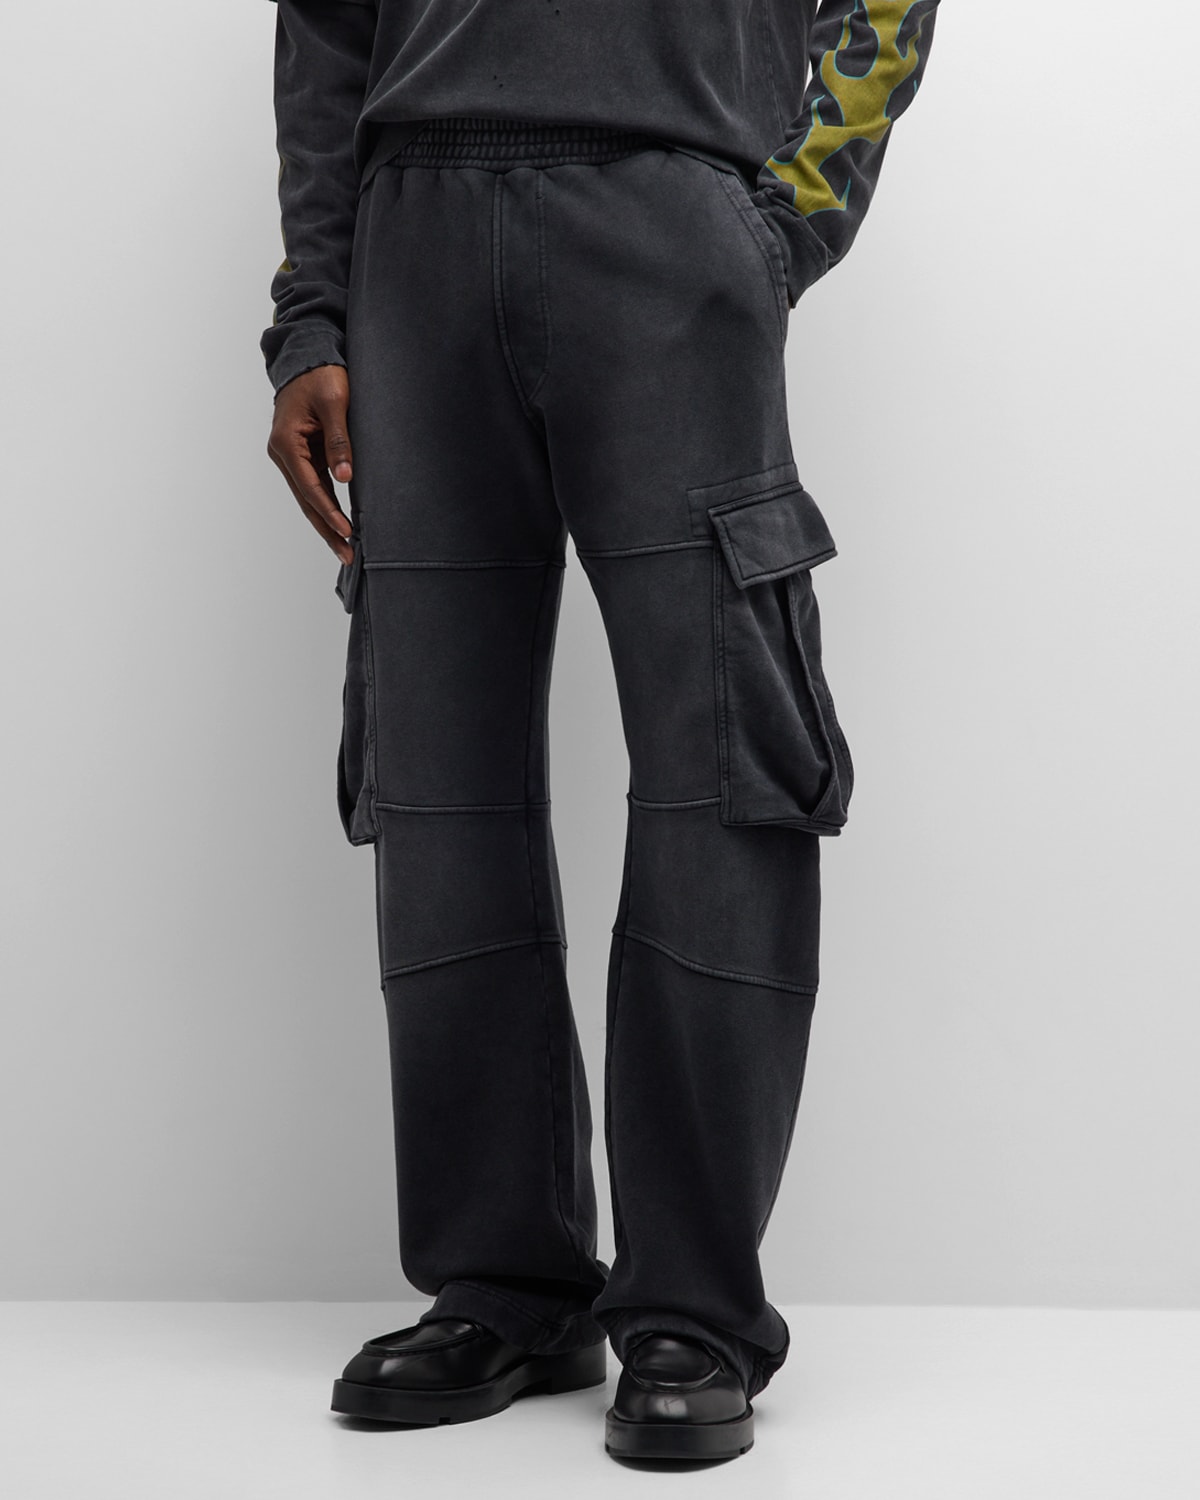 Givenchy Men's Paneled Cargo Sweatpants In Black